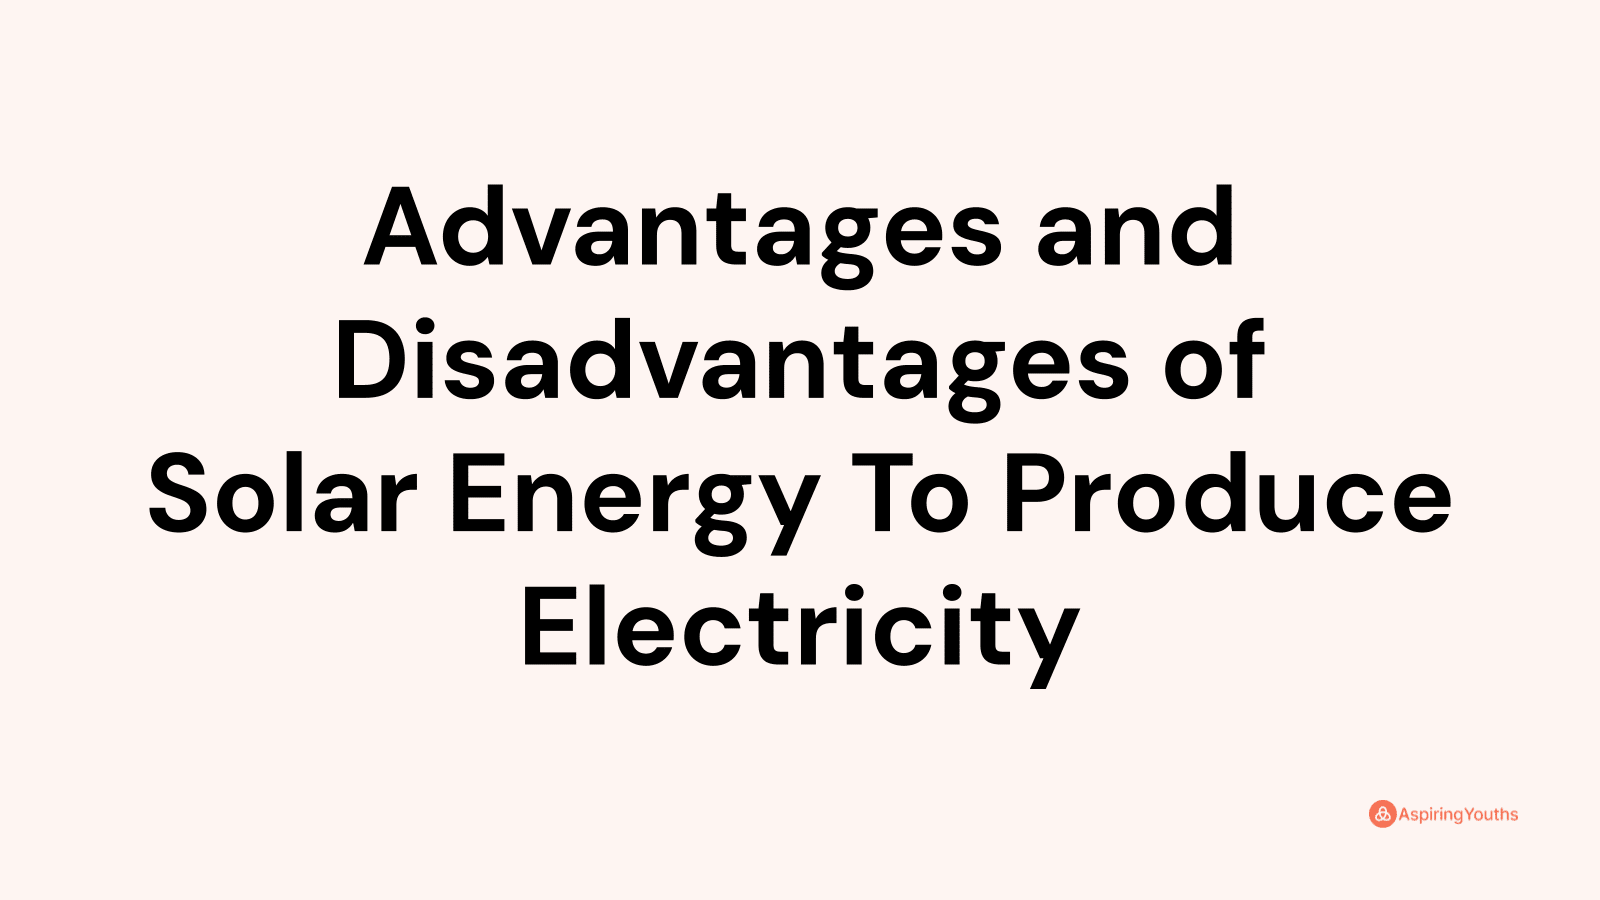 Advantages and disadvantages of Solar Energy To Produce Electricity